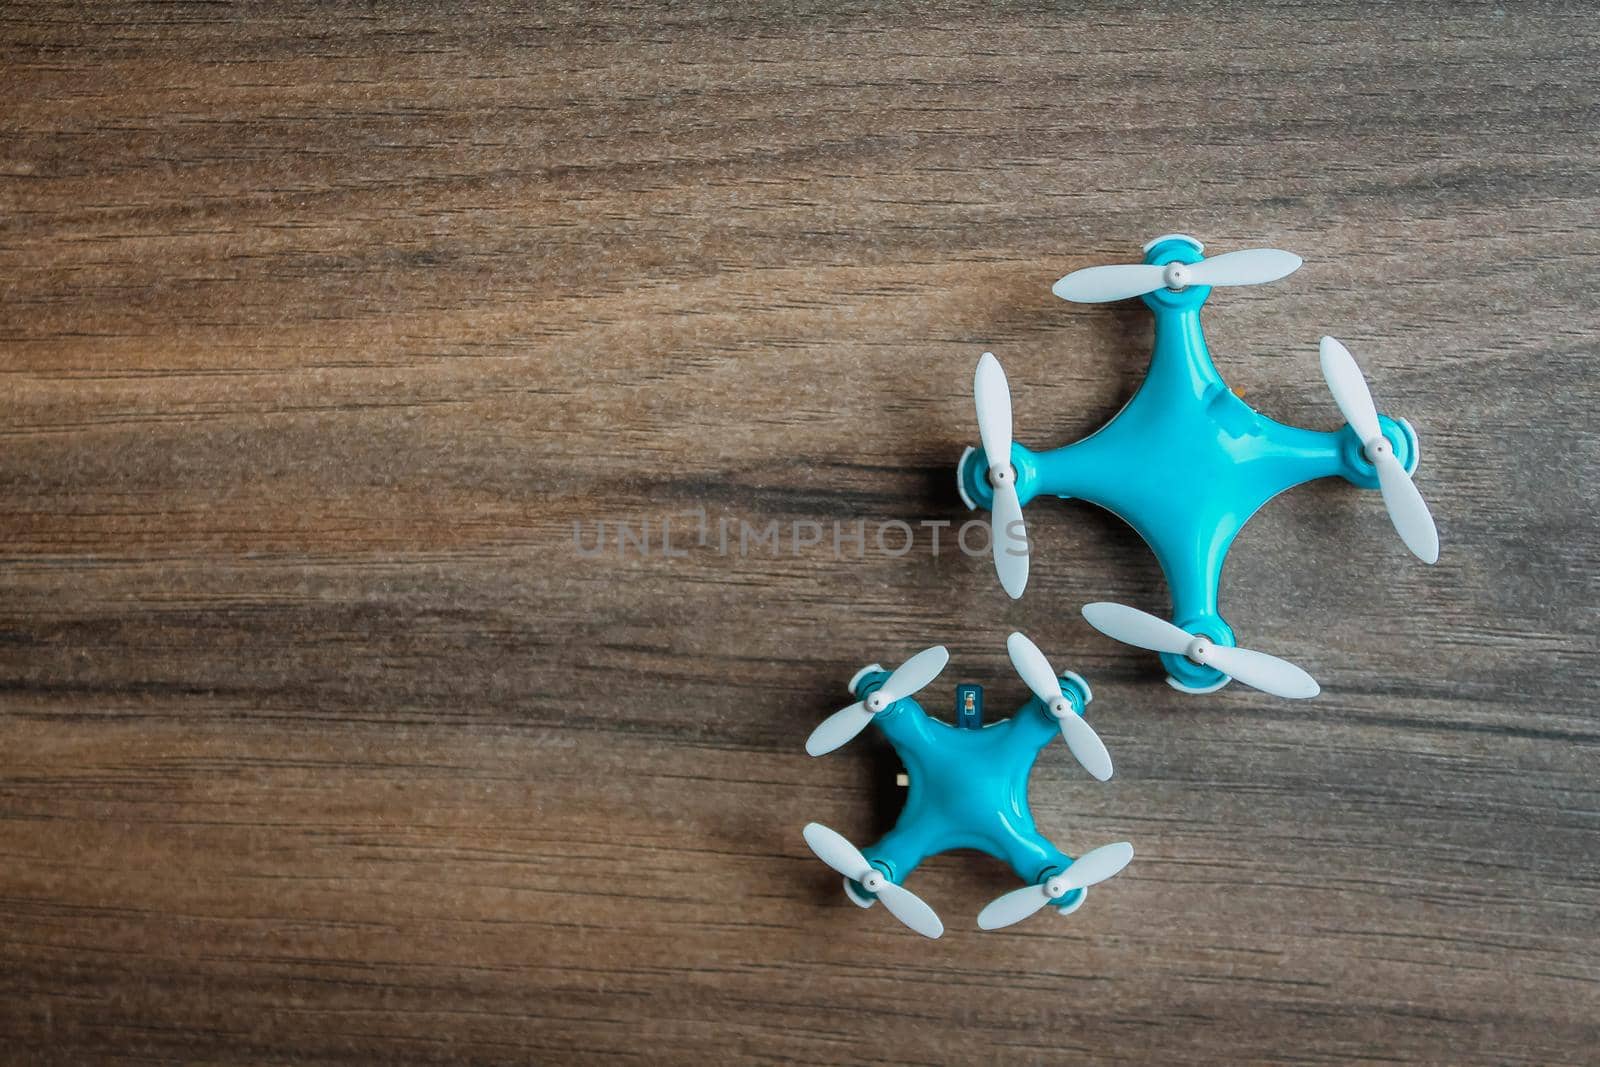 View of tiny drone on a wooden background. Small blue drone with white propellers.